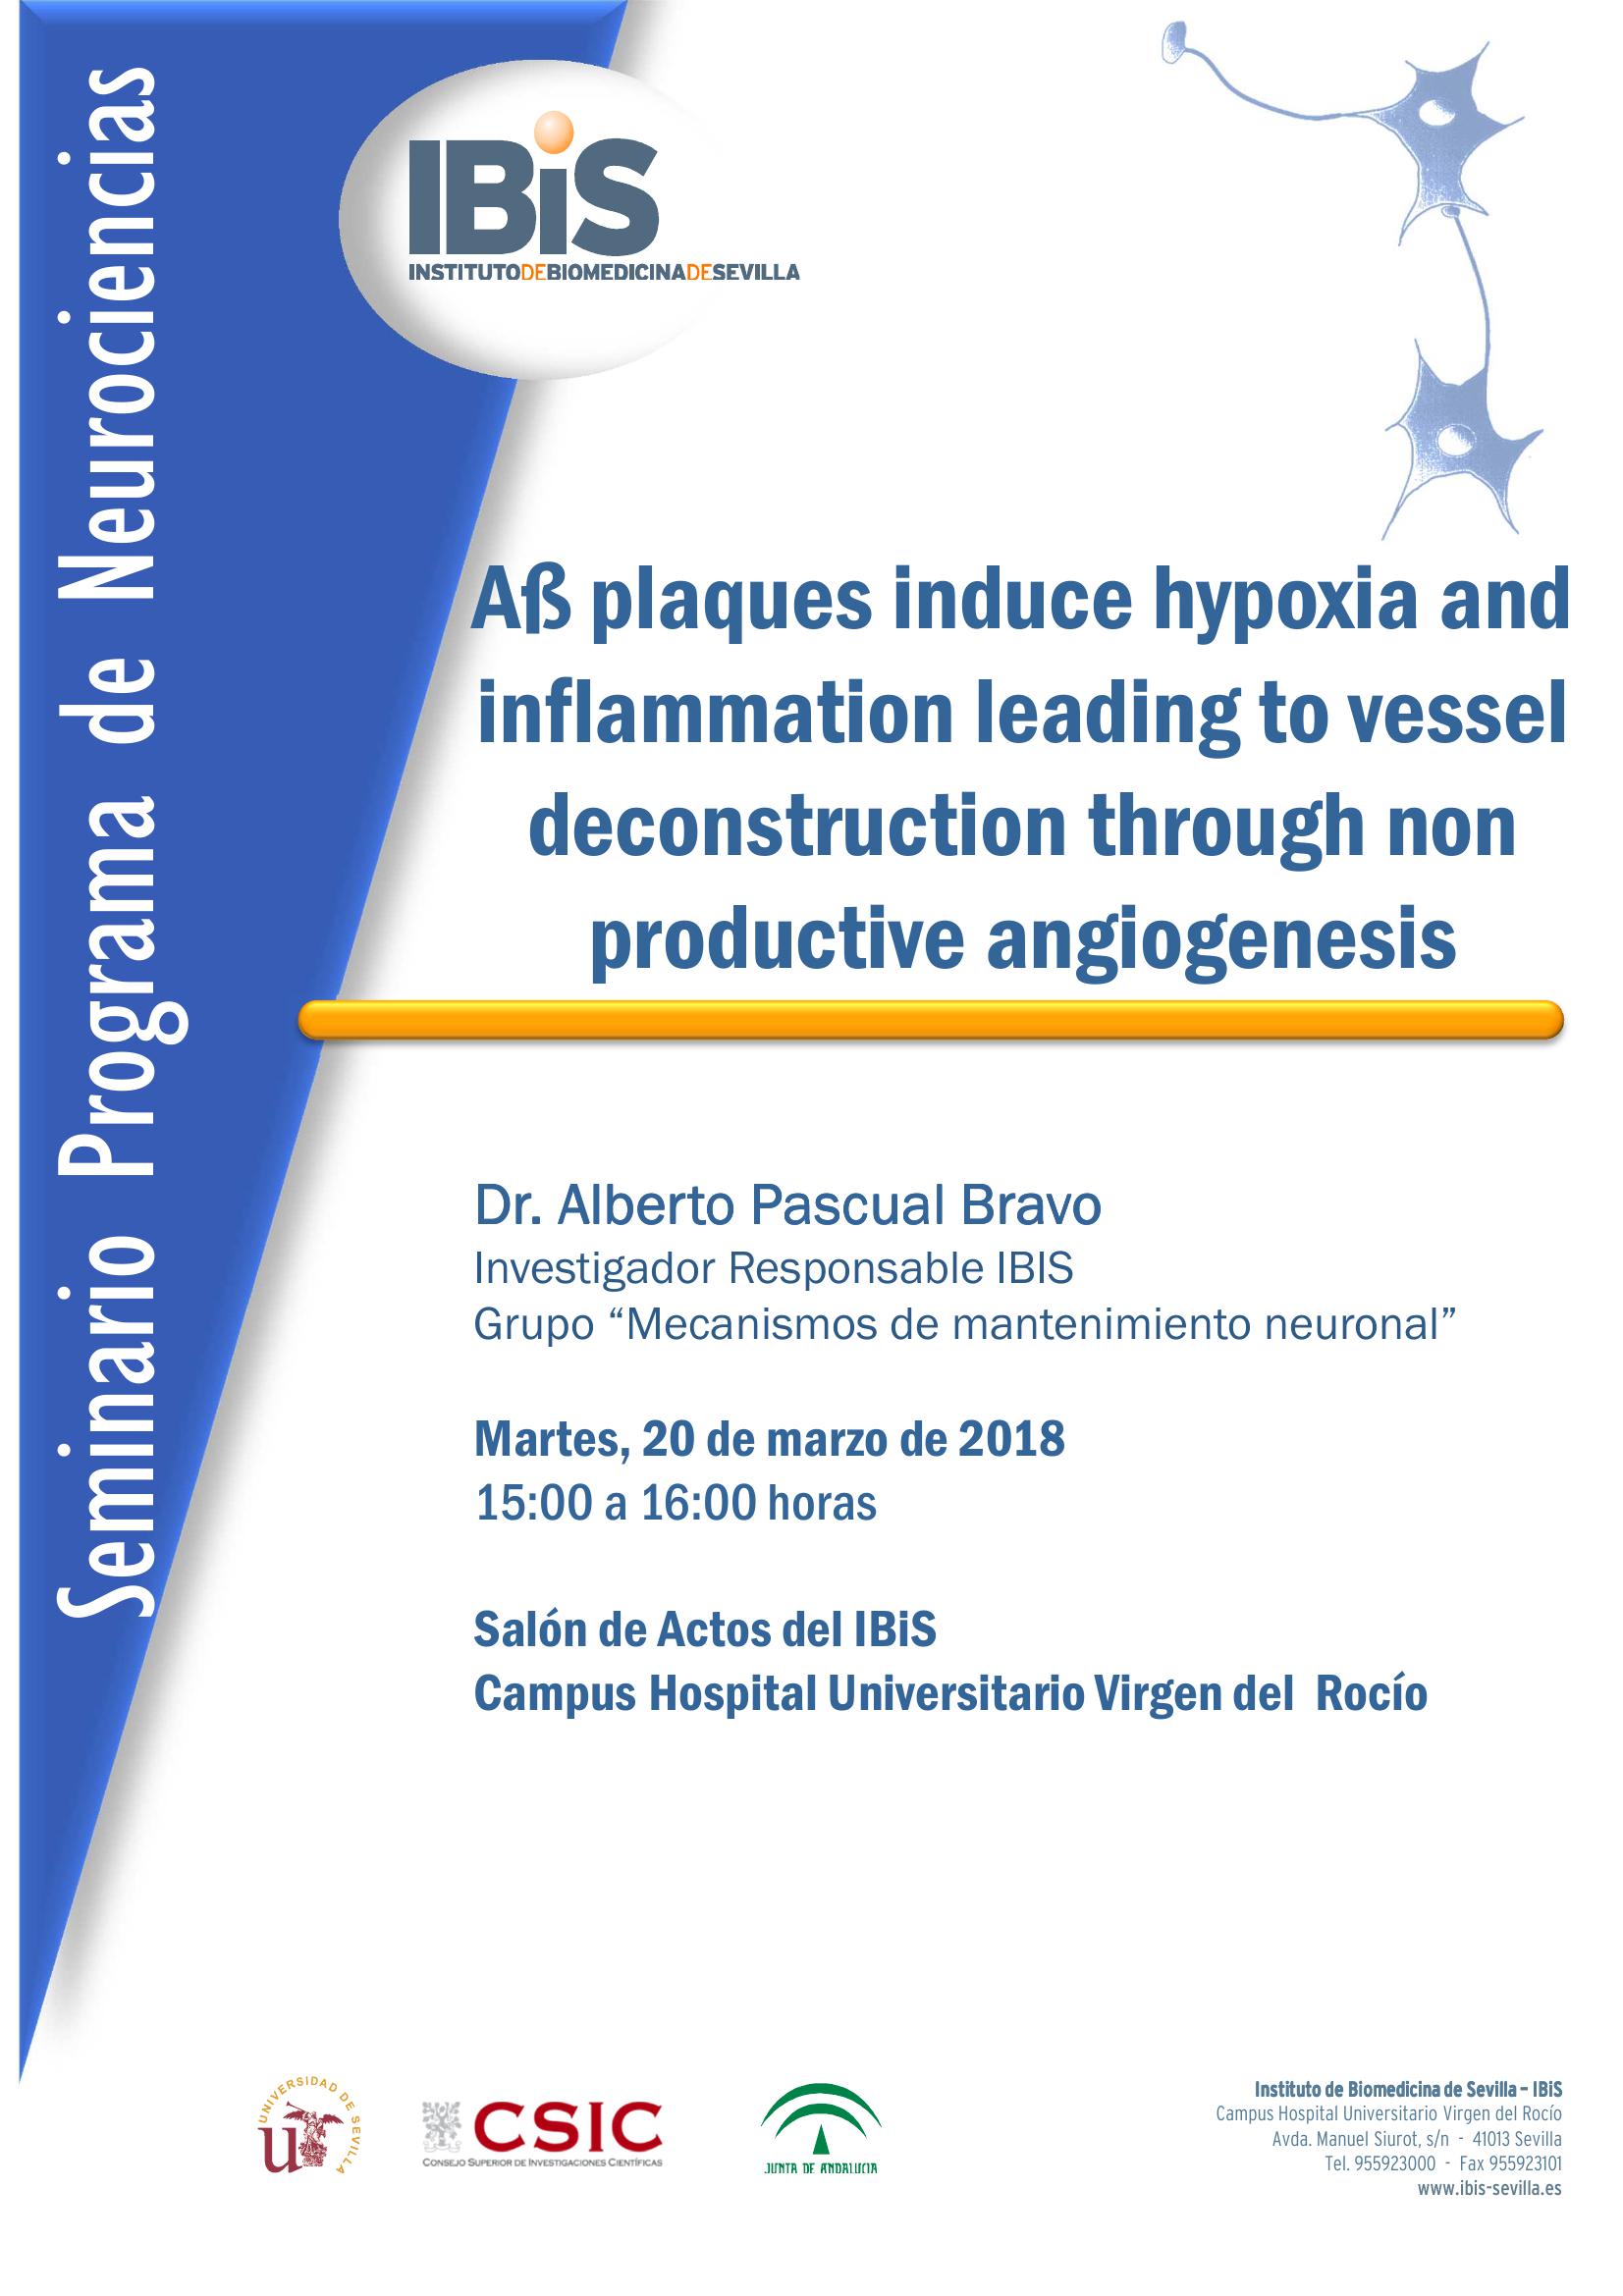 Poster: Aß plaques induce hypoxia and inflammation leading to vessel deconstruction through non productive angiogenesis